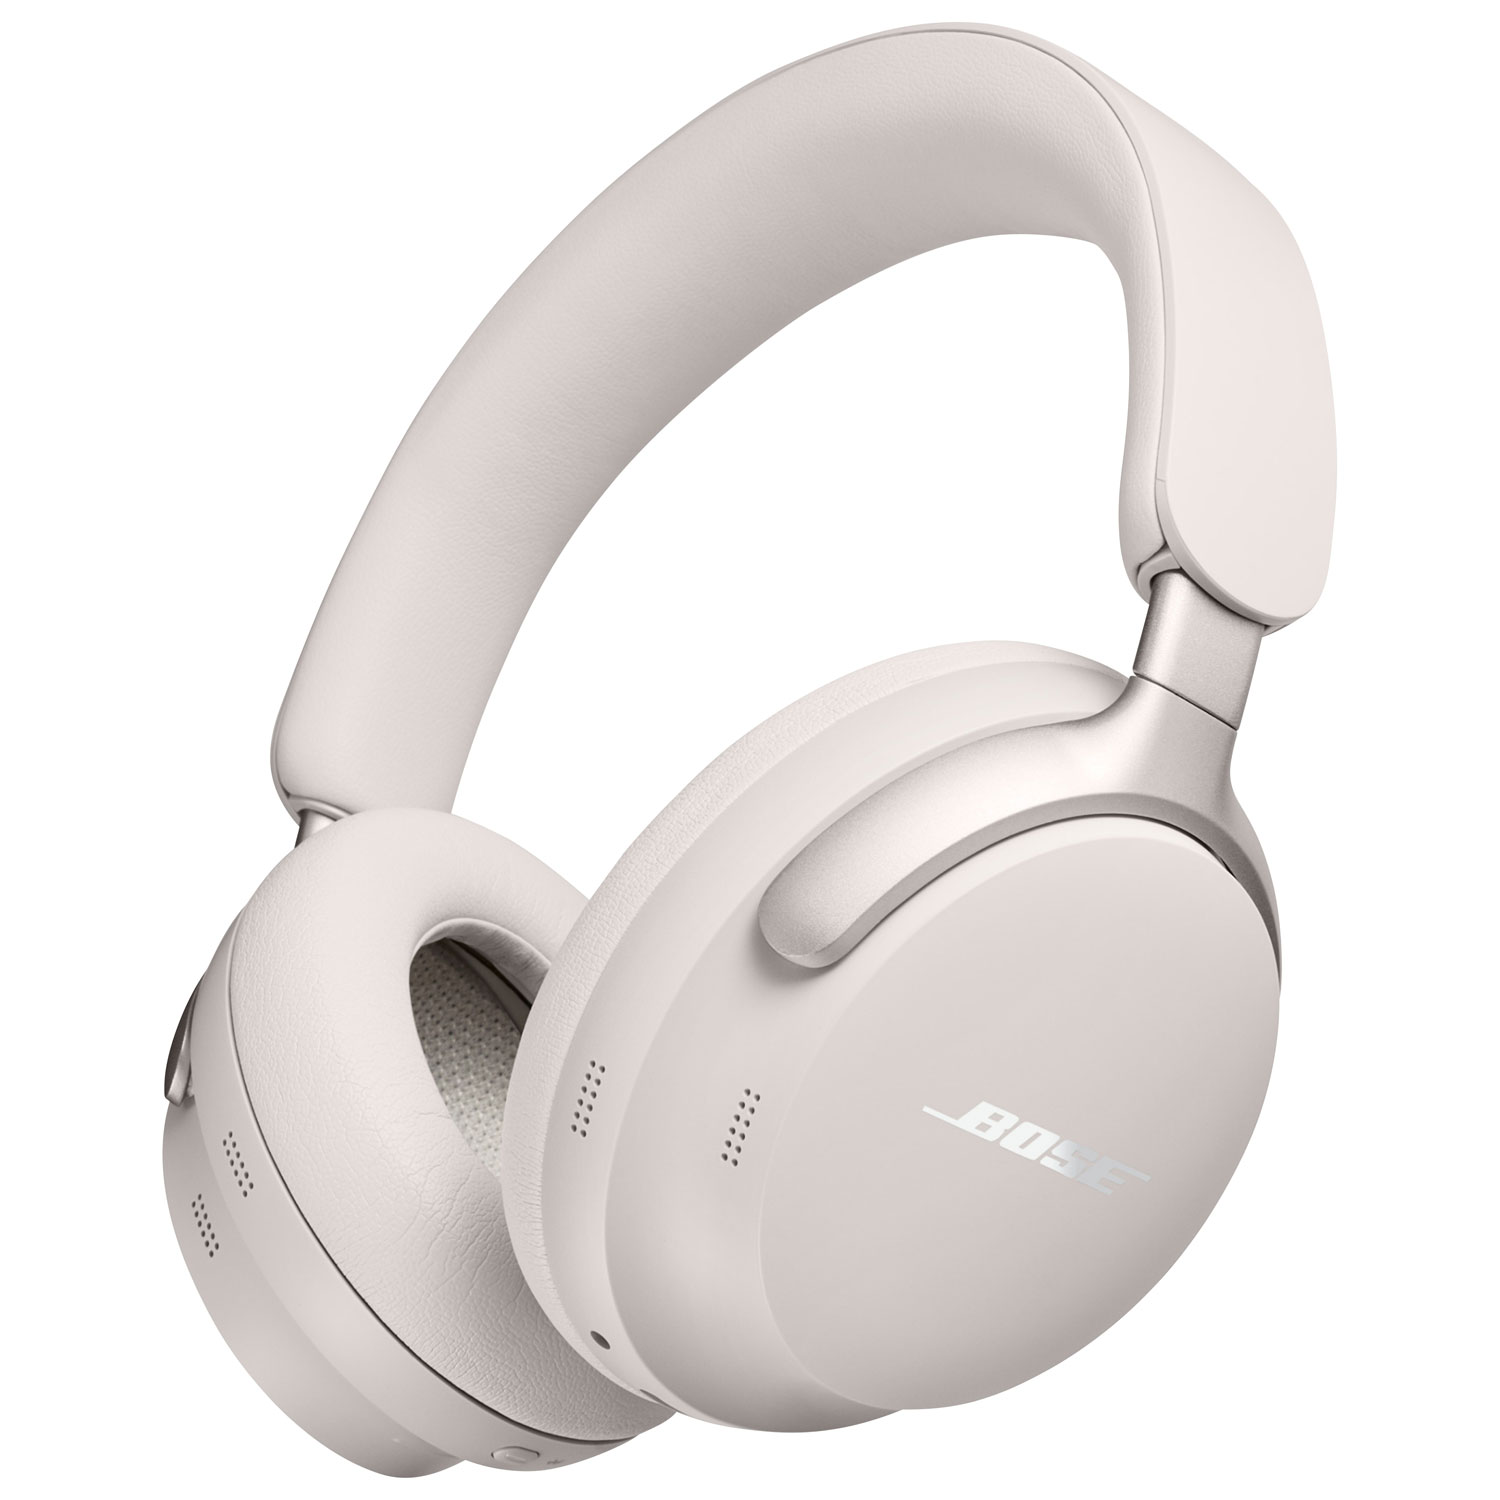 Bose QuietComfort Ultra Over-Ear Noise Cancelling Bluetooth Headphones - White Smoke